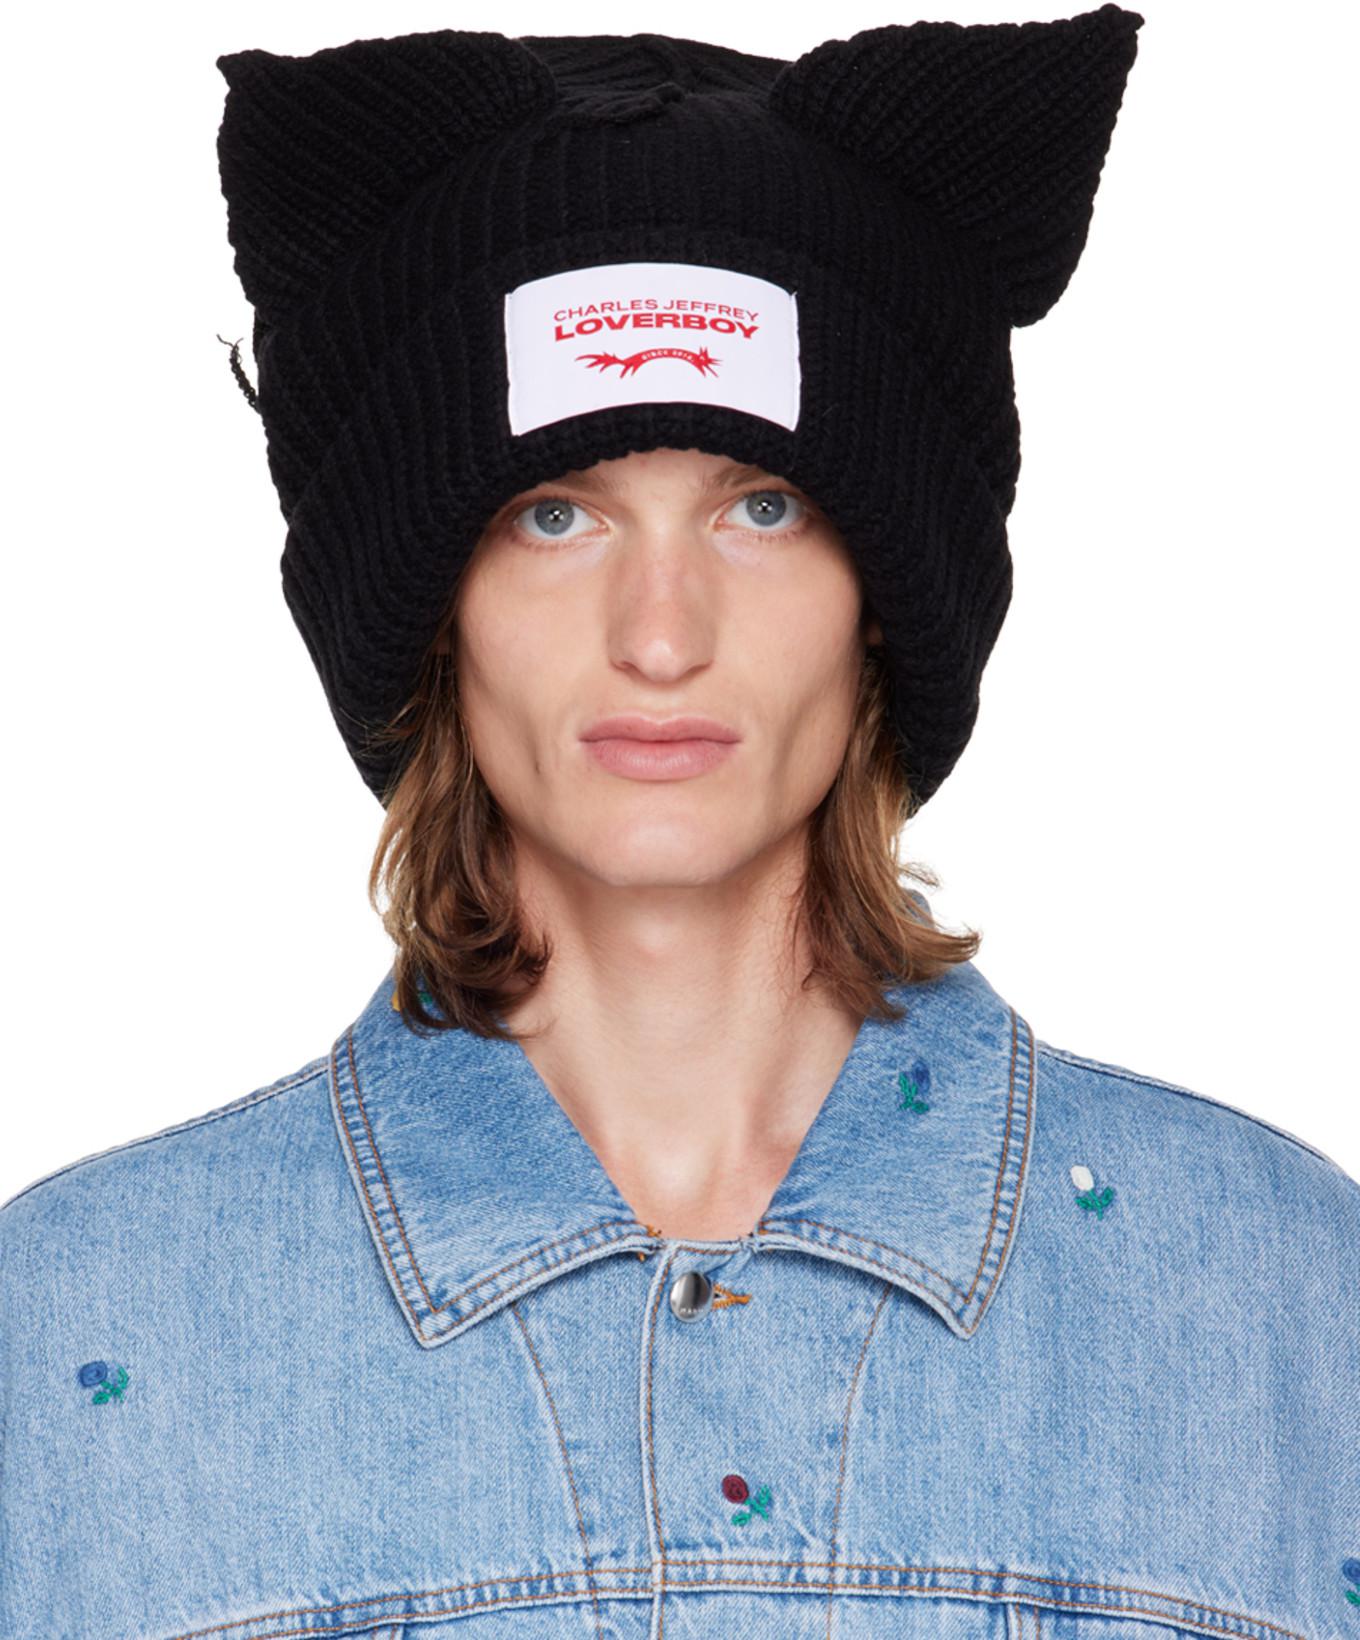 Black Supersized Chunky Ears Beanie by CHARLES JEFFREY LOVERBOY